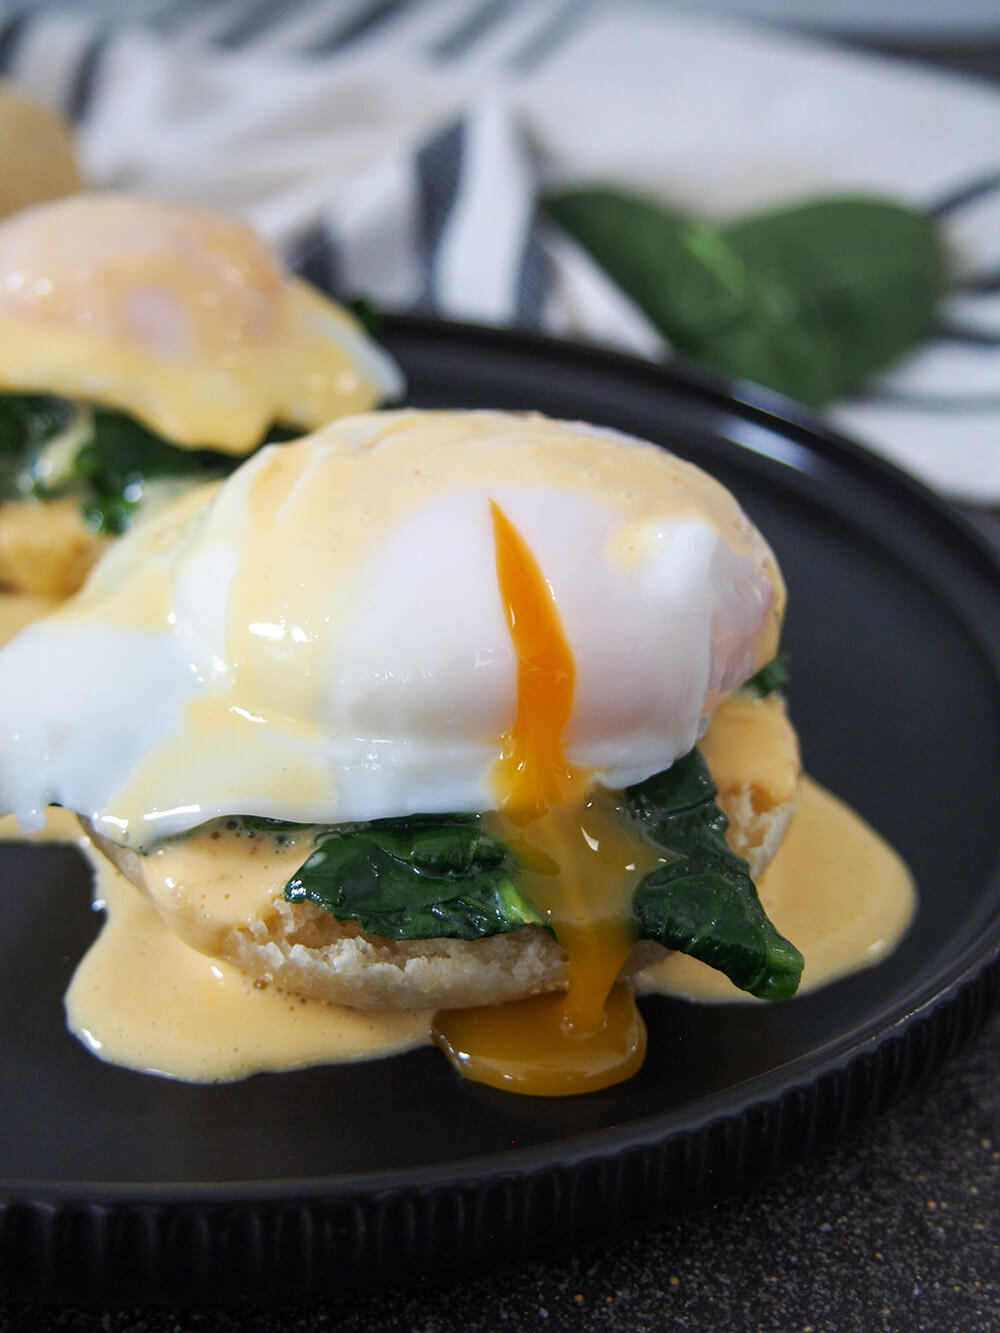 eggs Florentine with yolk of egg cut and oozing into rest